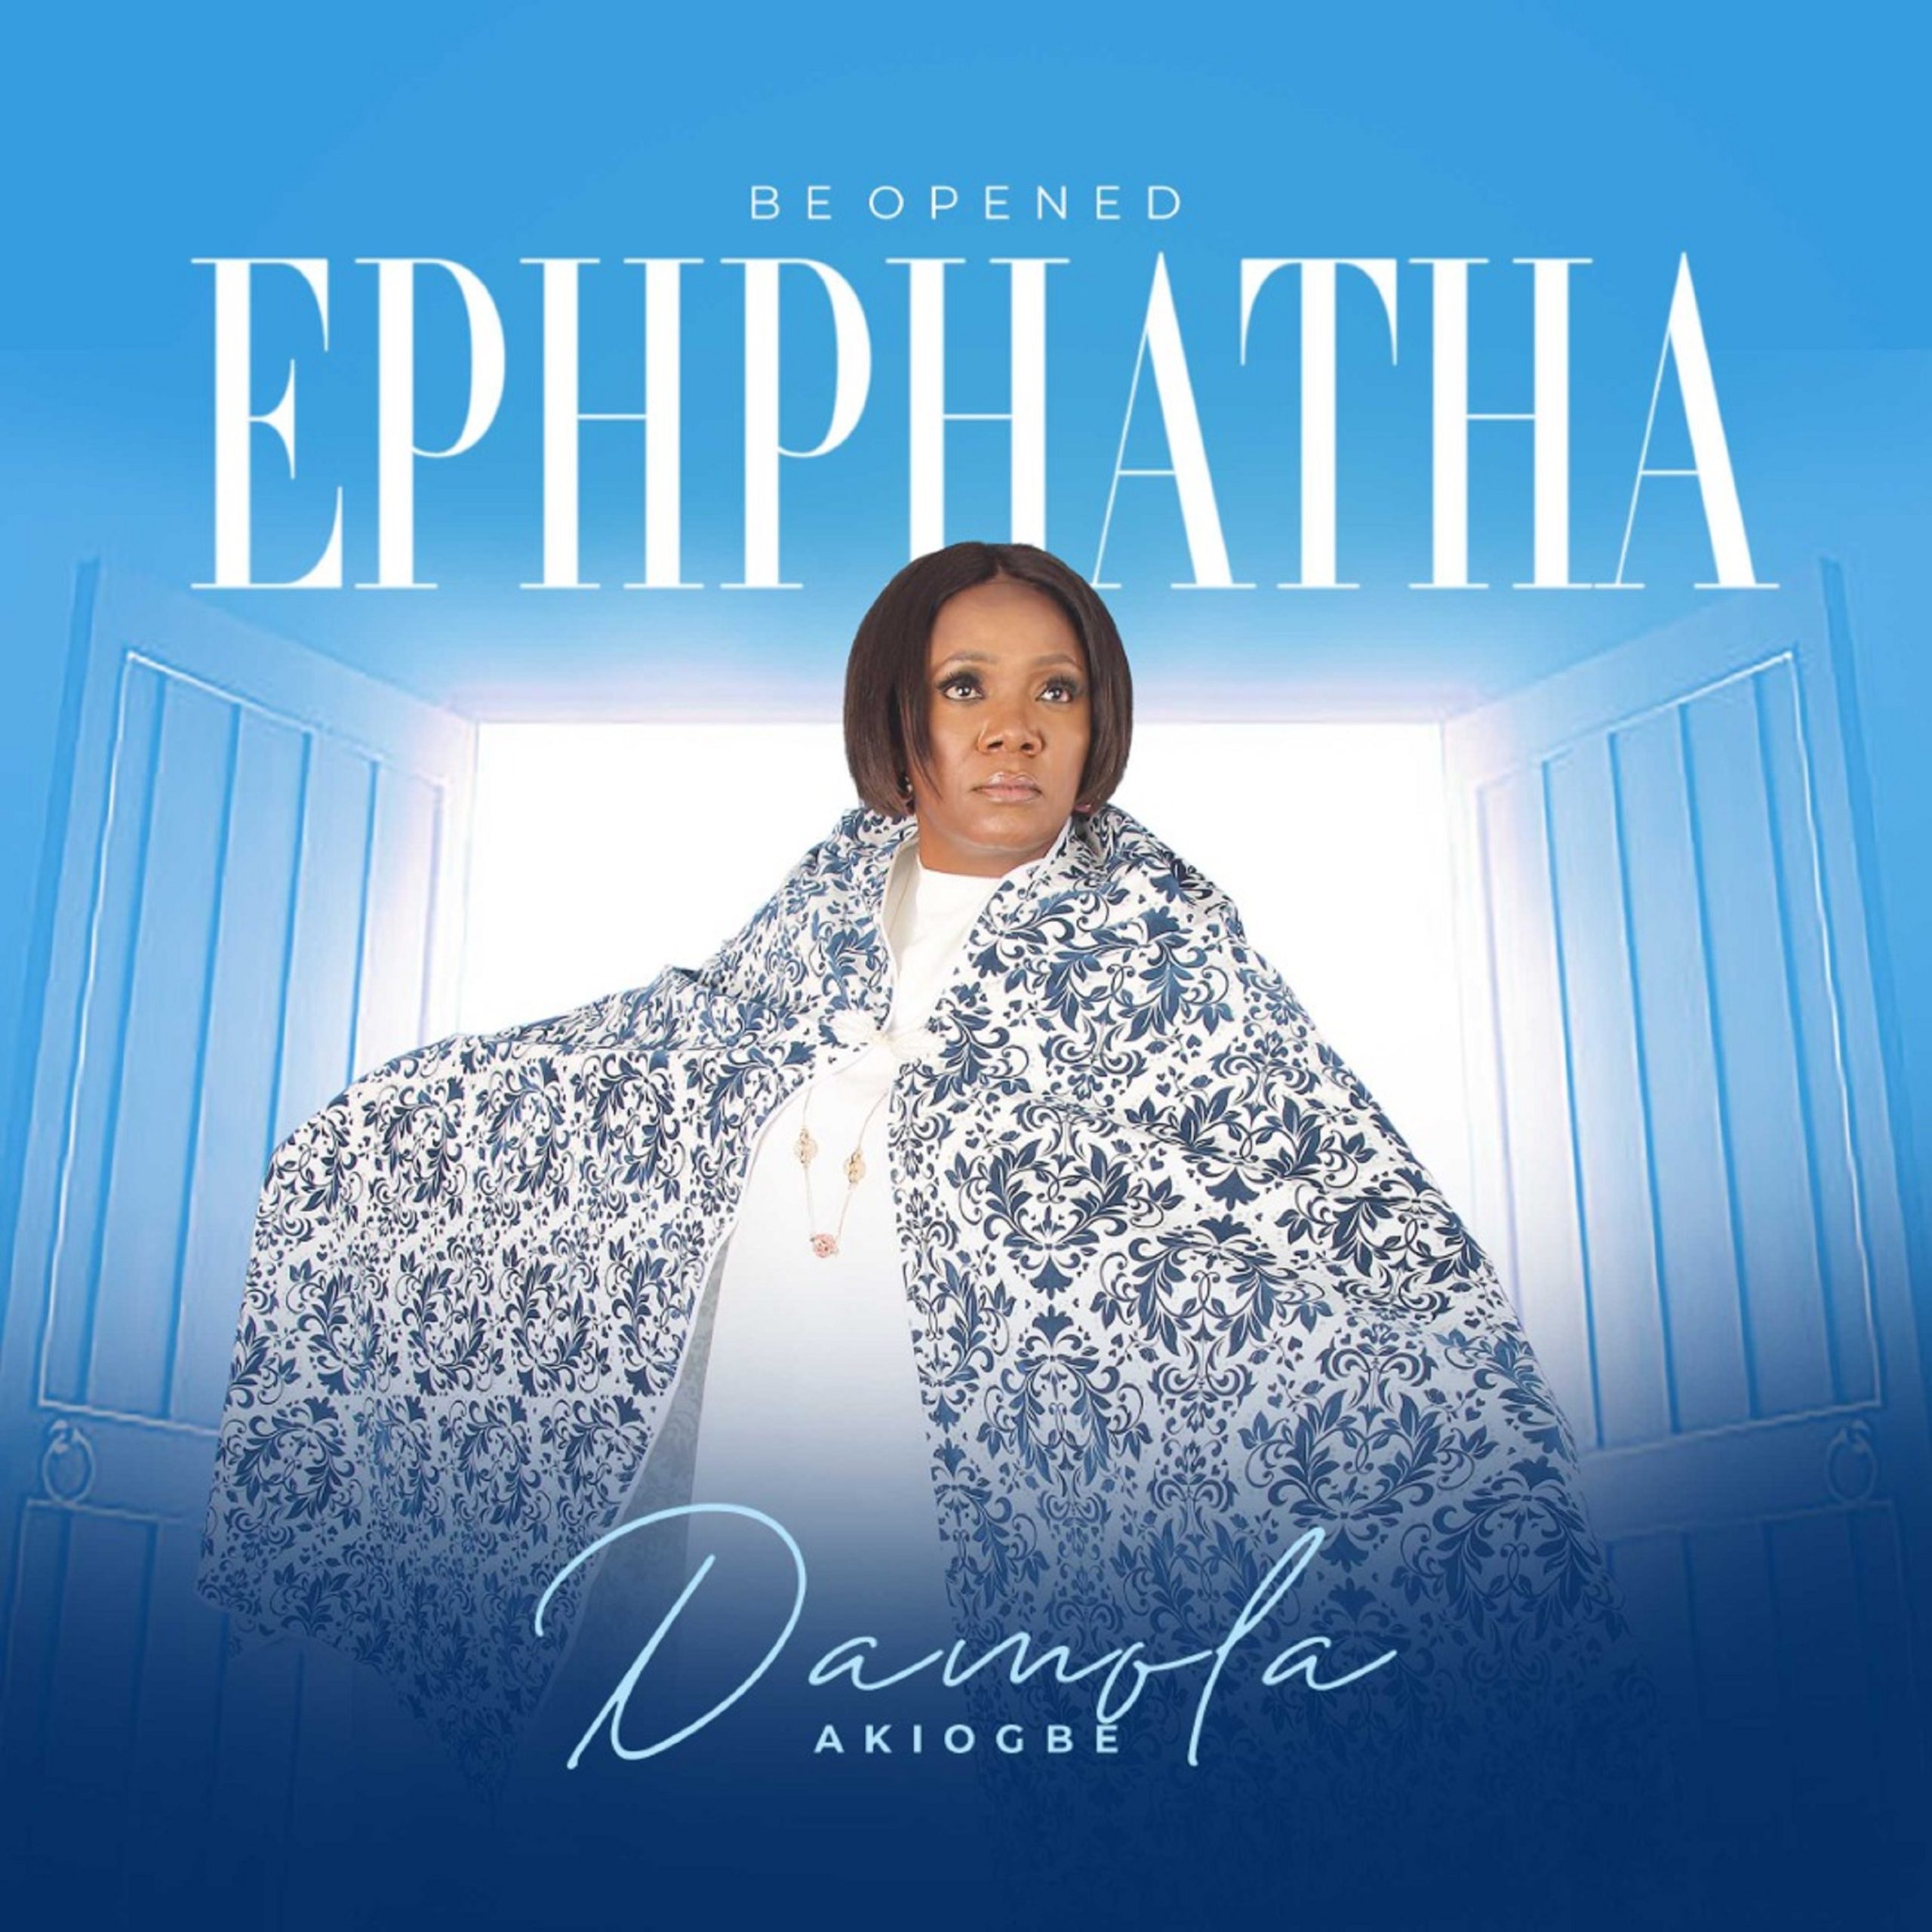 Download Mp3: Damola Akiogbe - Ephphata (Be Opened)